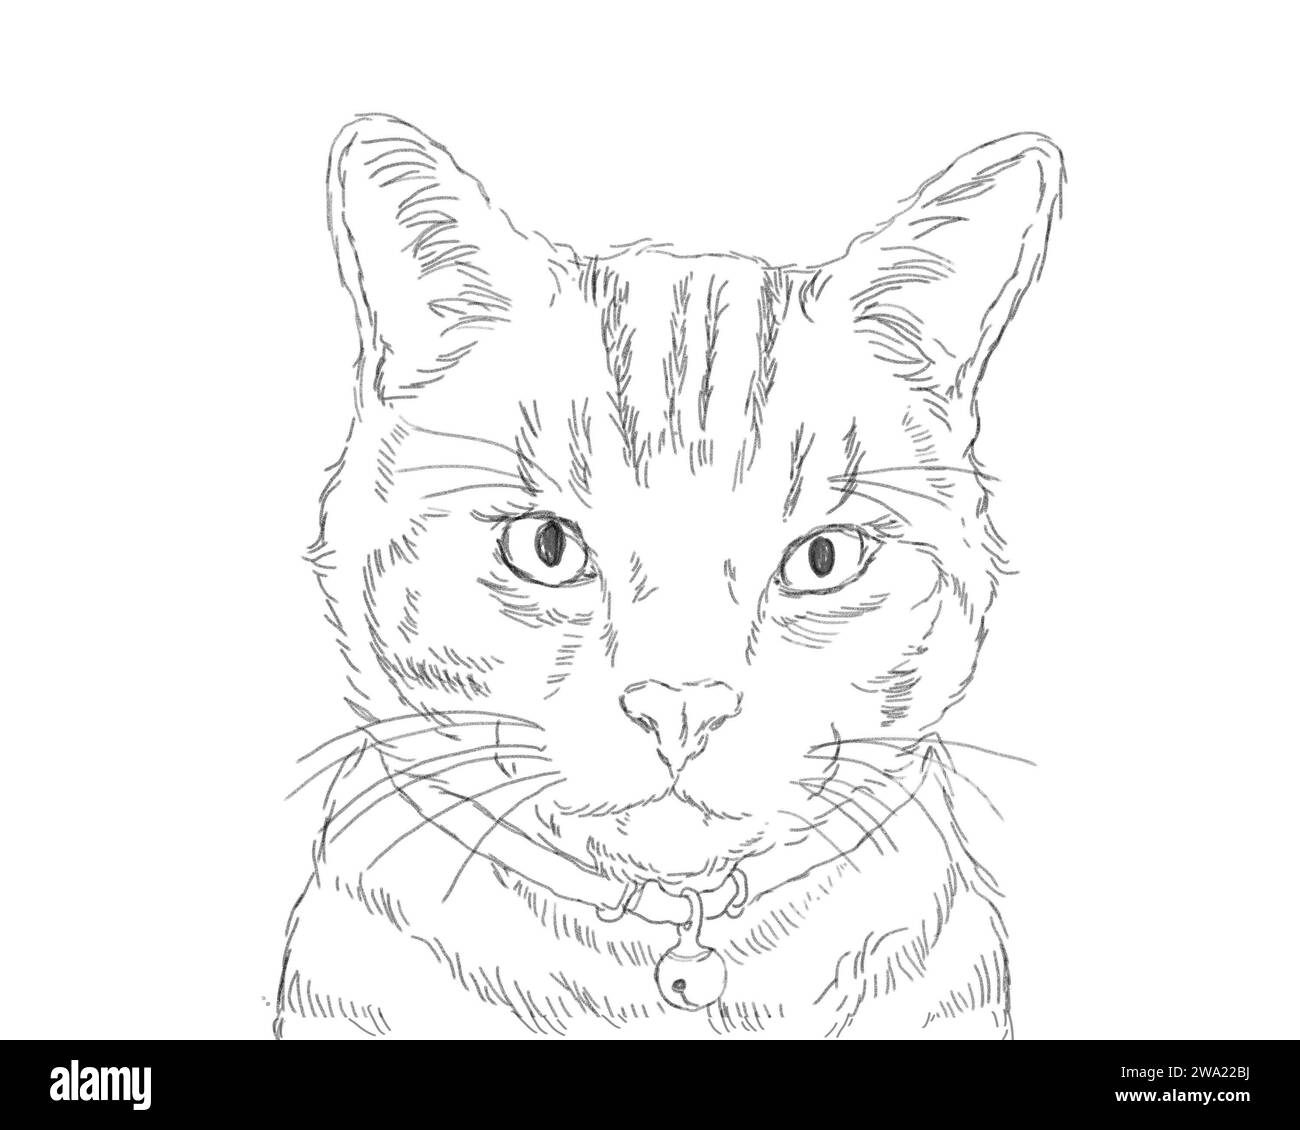 Cute American shorthair cat portrait. Black and white sketch drawing. Domestic pet animal concept. Stock Photo